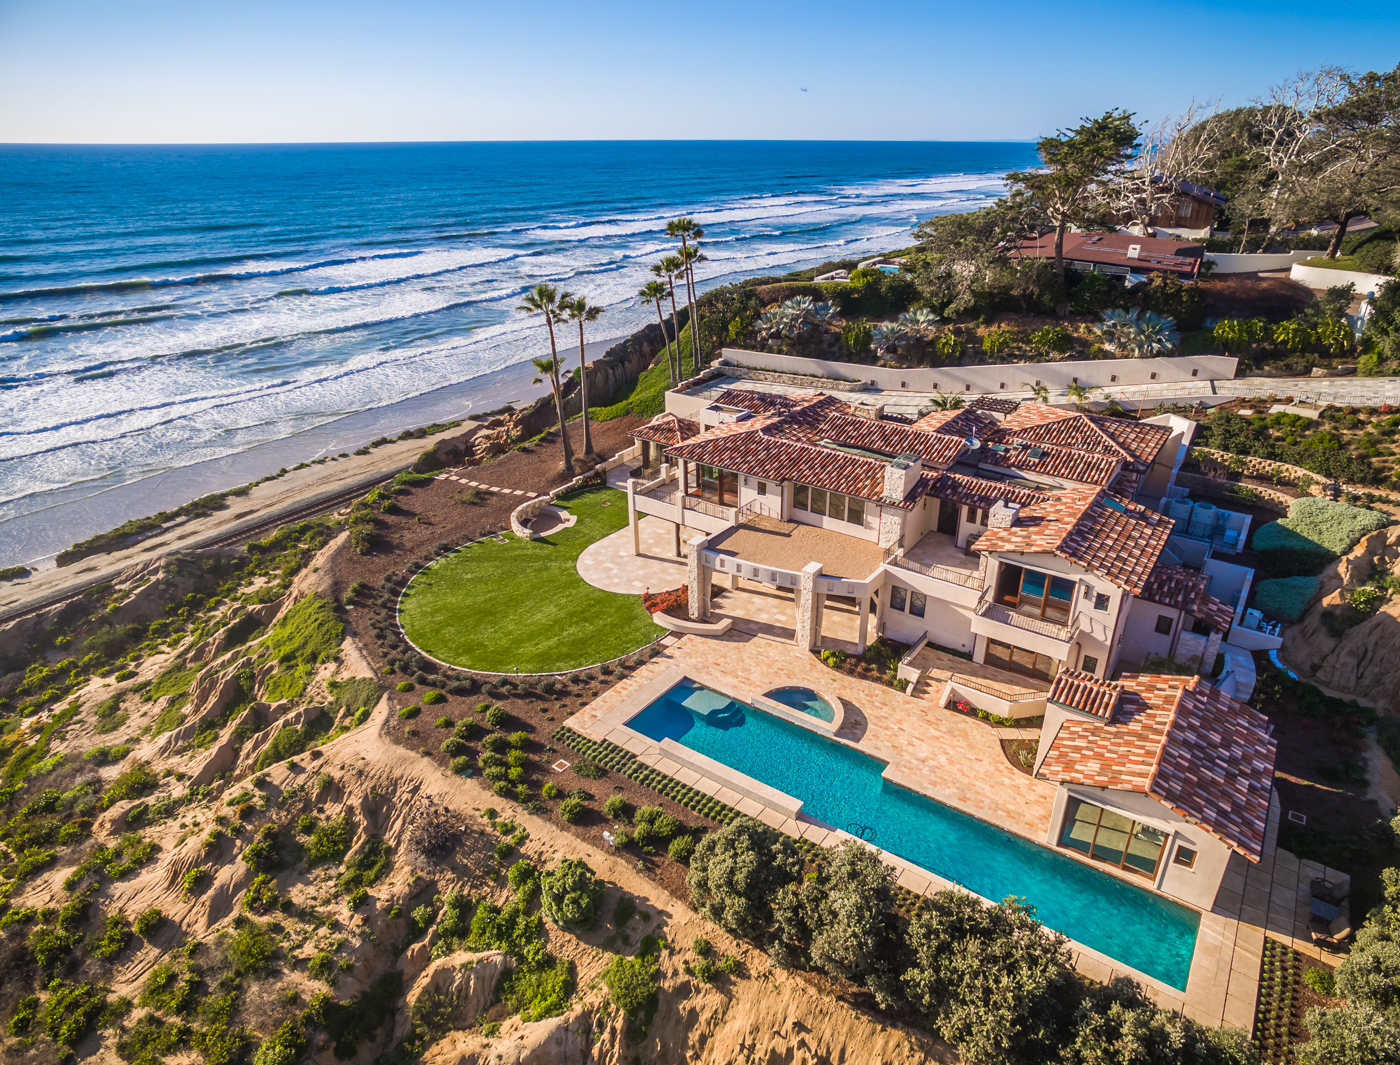 Del Mar home sells for more than $21 million in San Diego housing ...